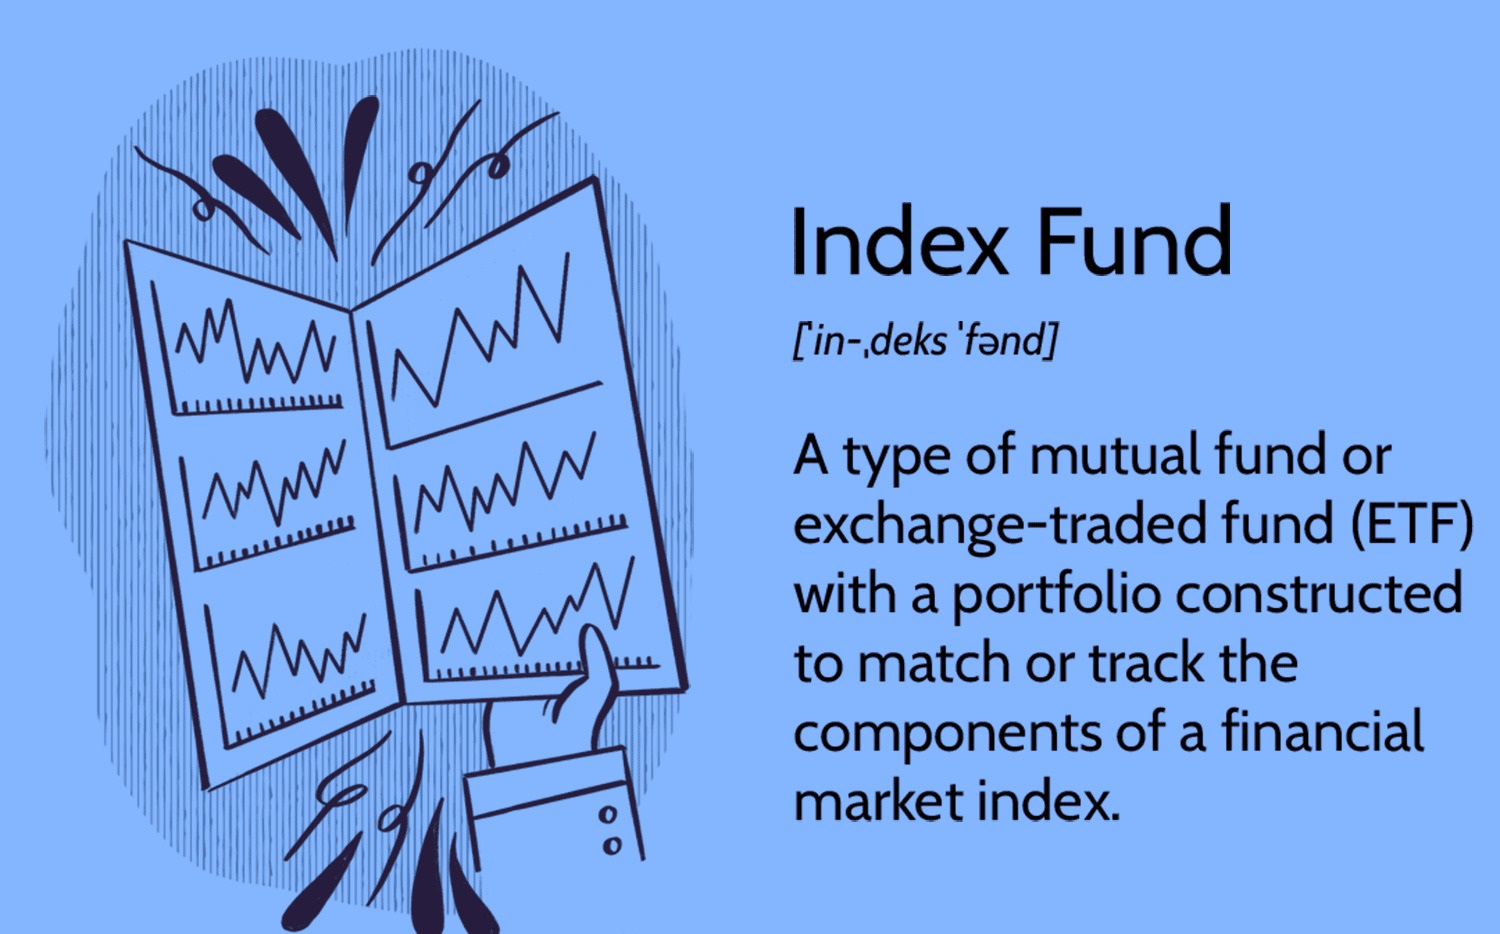 What Types Of Investments Are Typically In Passively Managed Index Funds